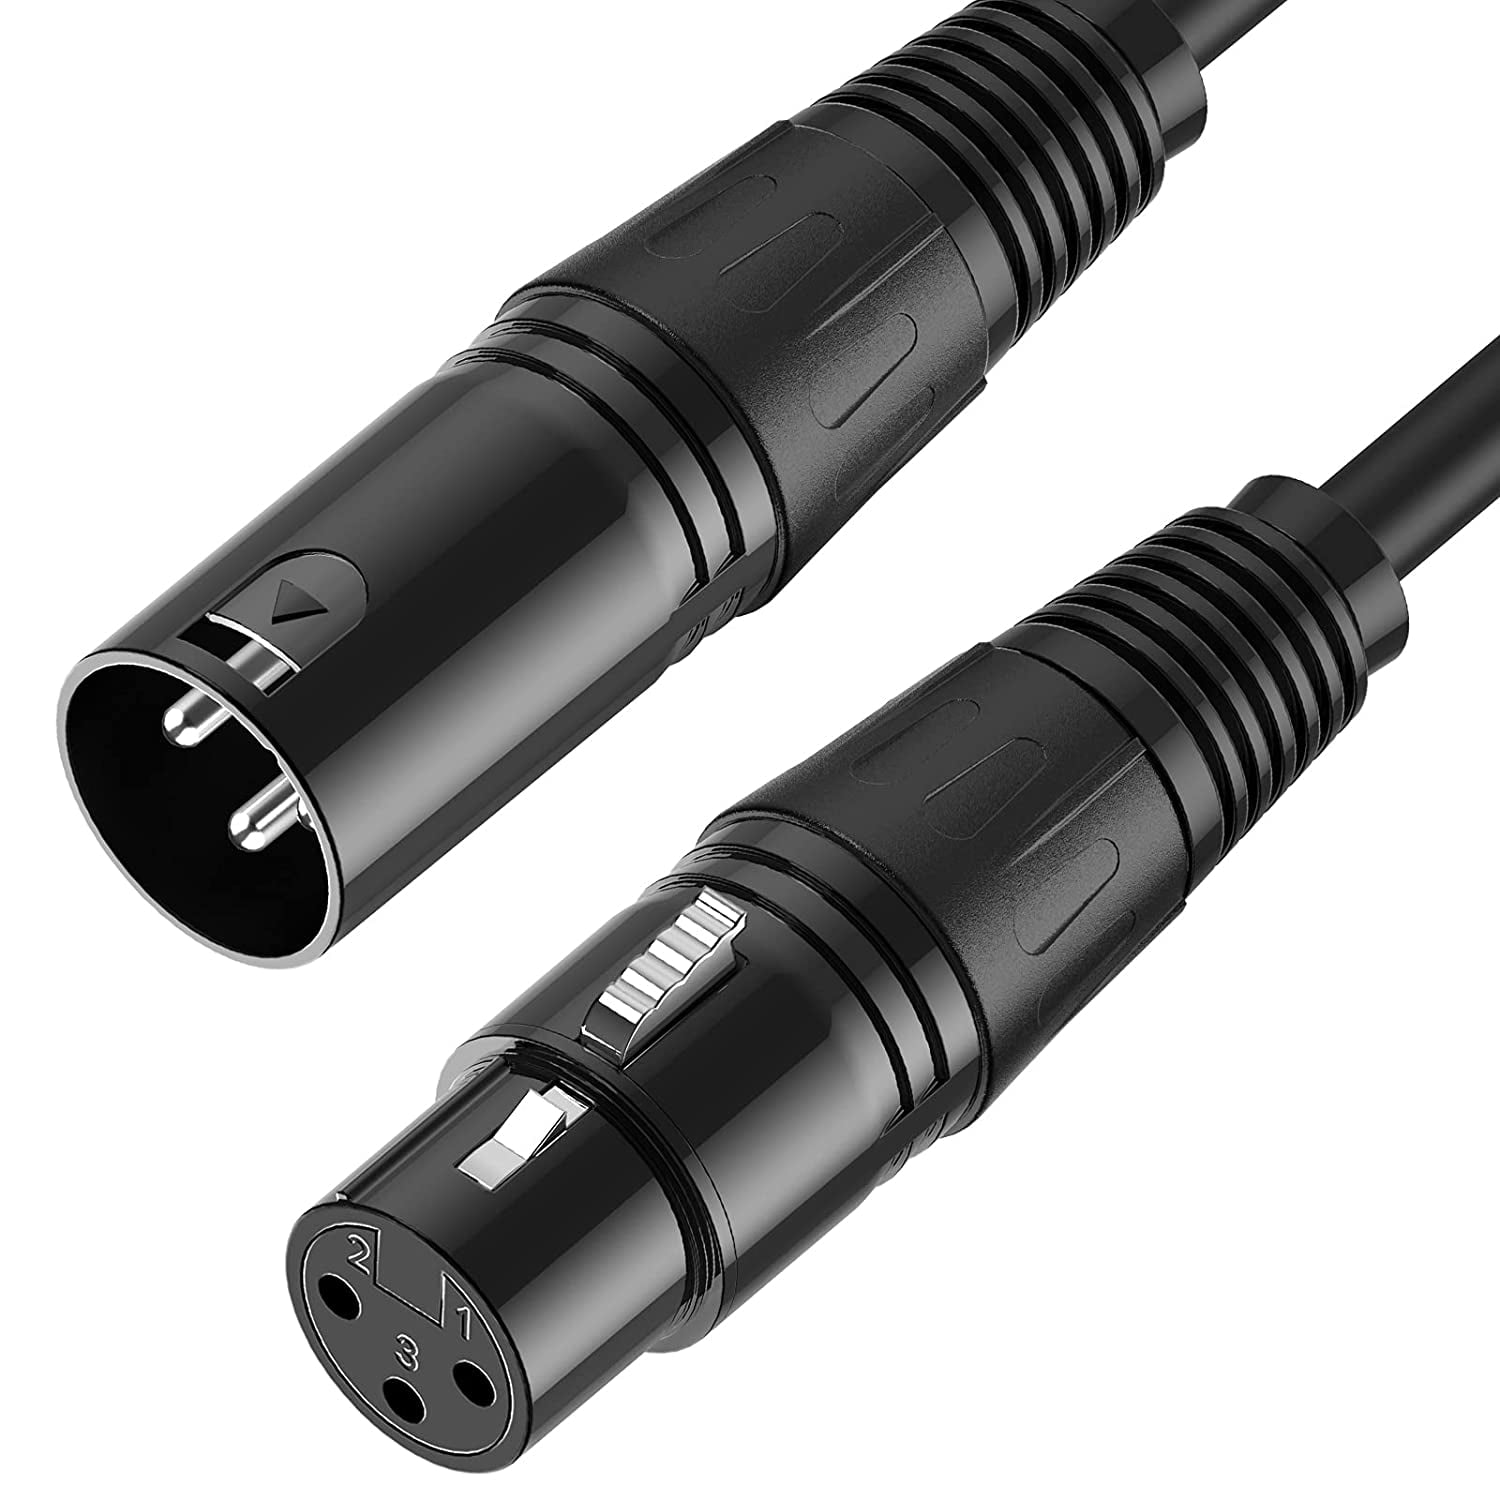 Xlr Cable Male To Female 3.3Ft - Xlr Cables Microphone Cable Cord